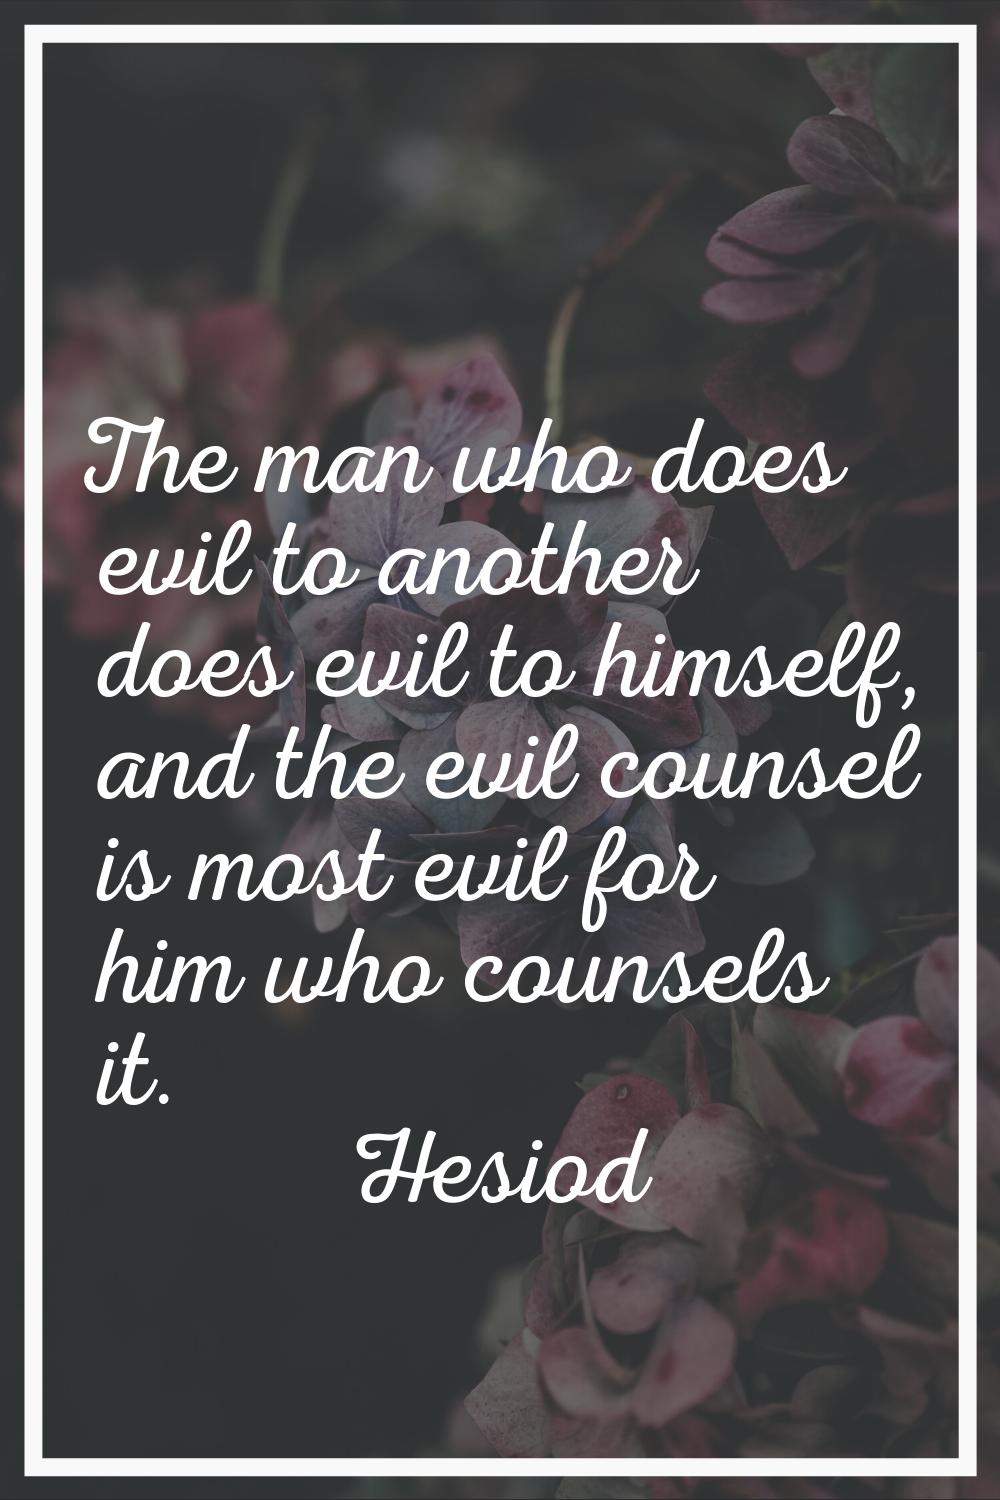 The man who does evil to another does evil to himself, and the evil counsel is most evil for him wh